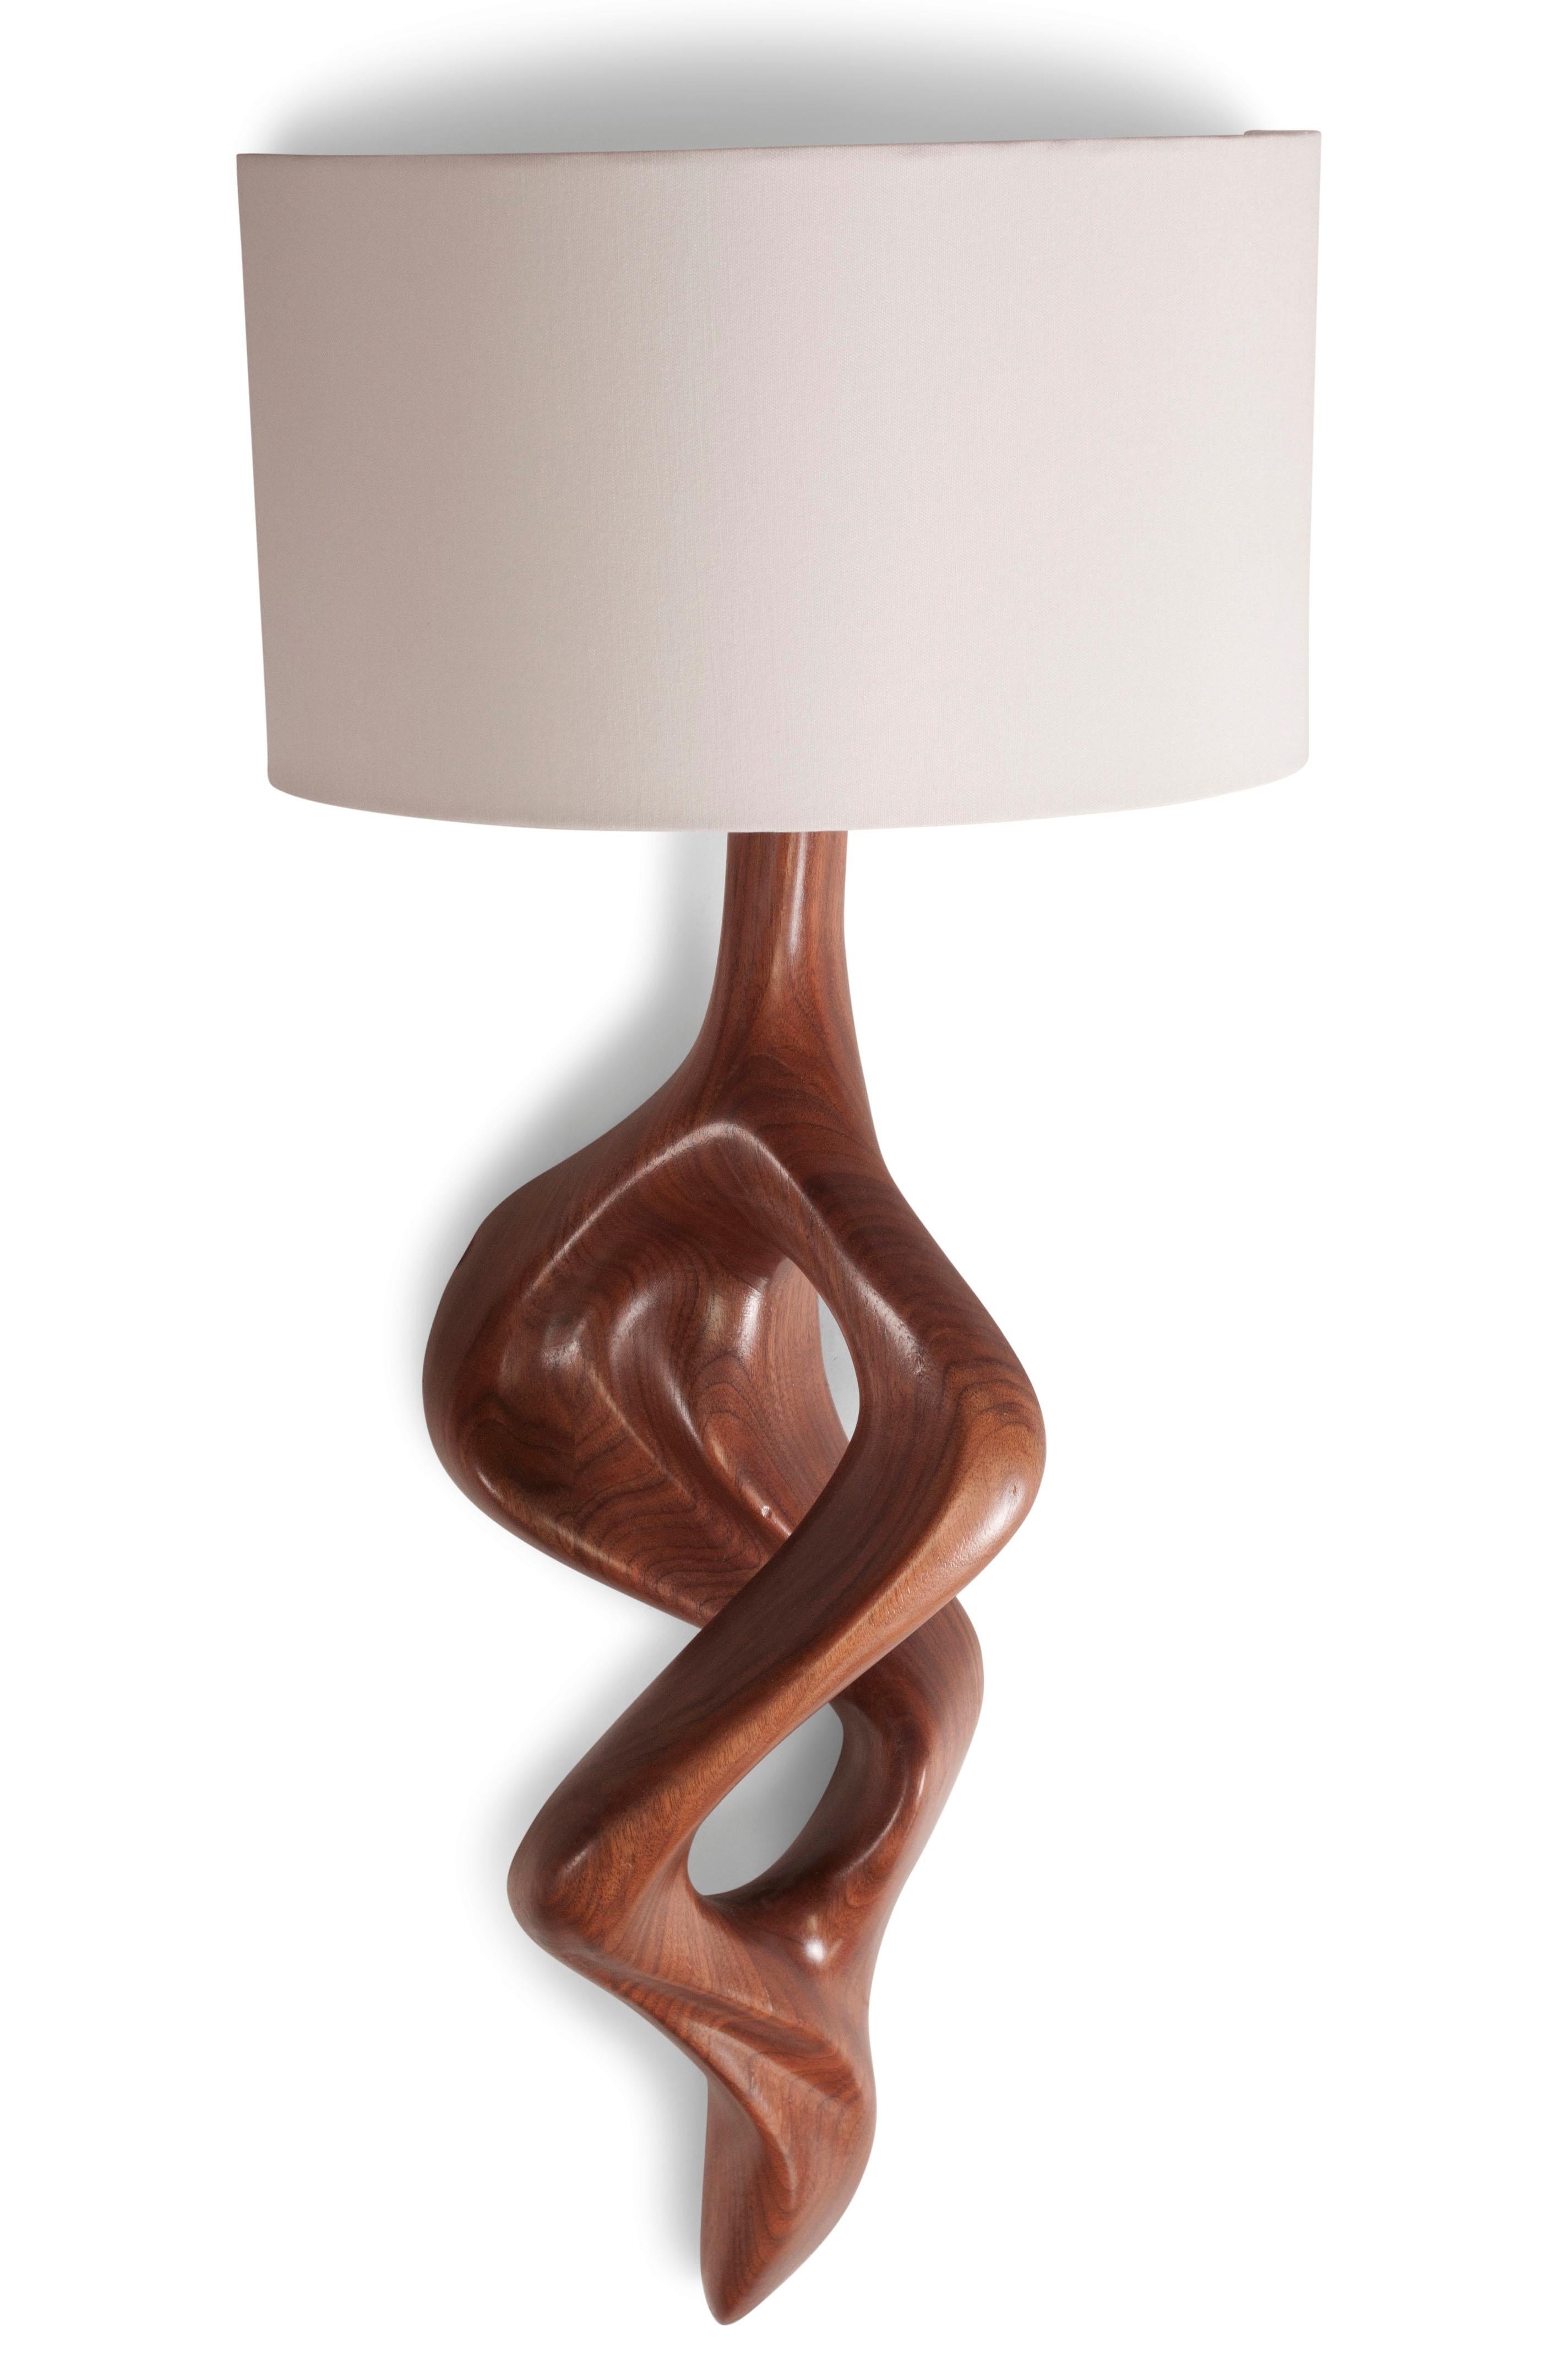 Contemporary Amorph Nomi Sconces Natural stain on Walnut wood with Ivory Shade For Sale